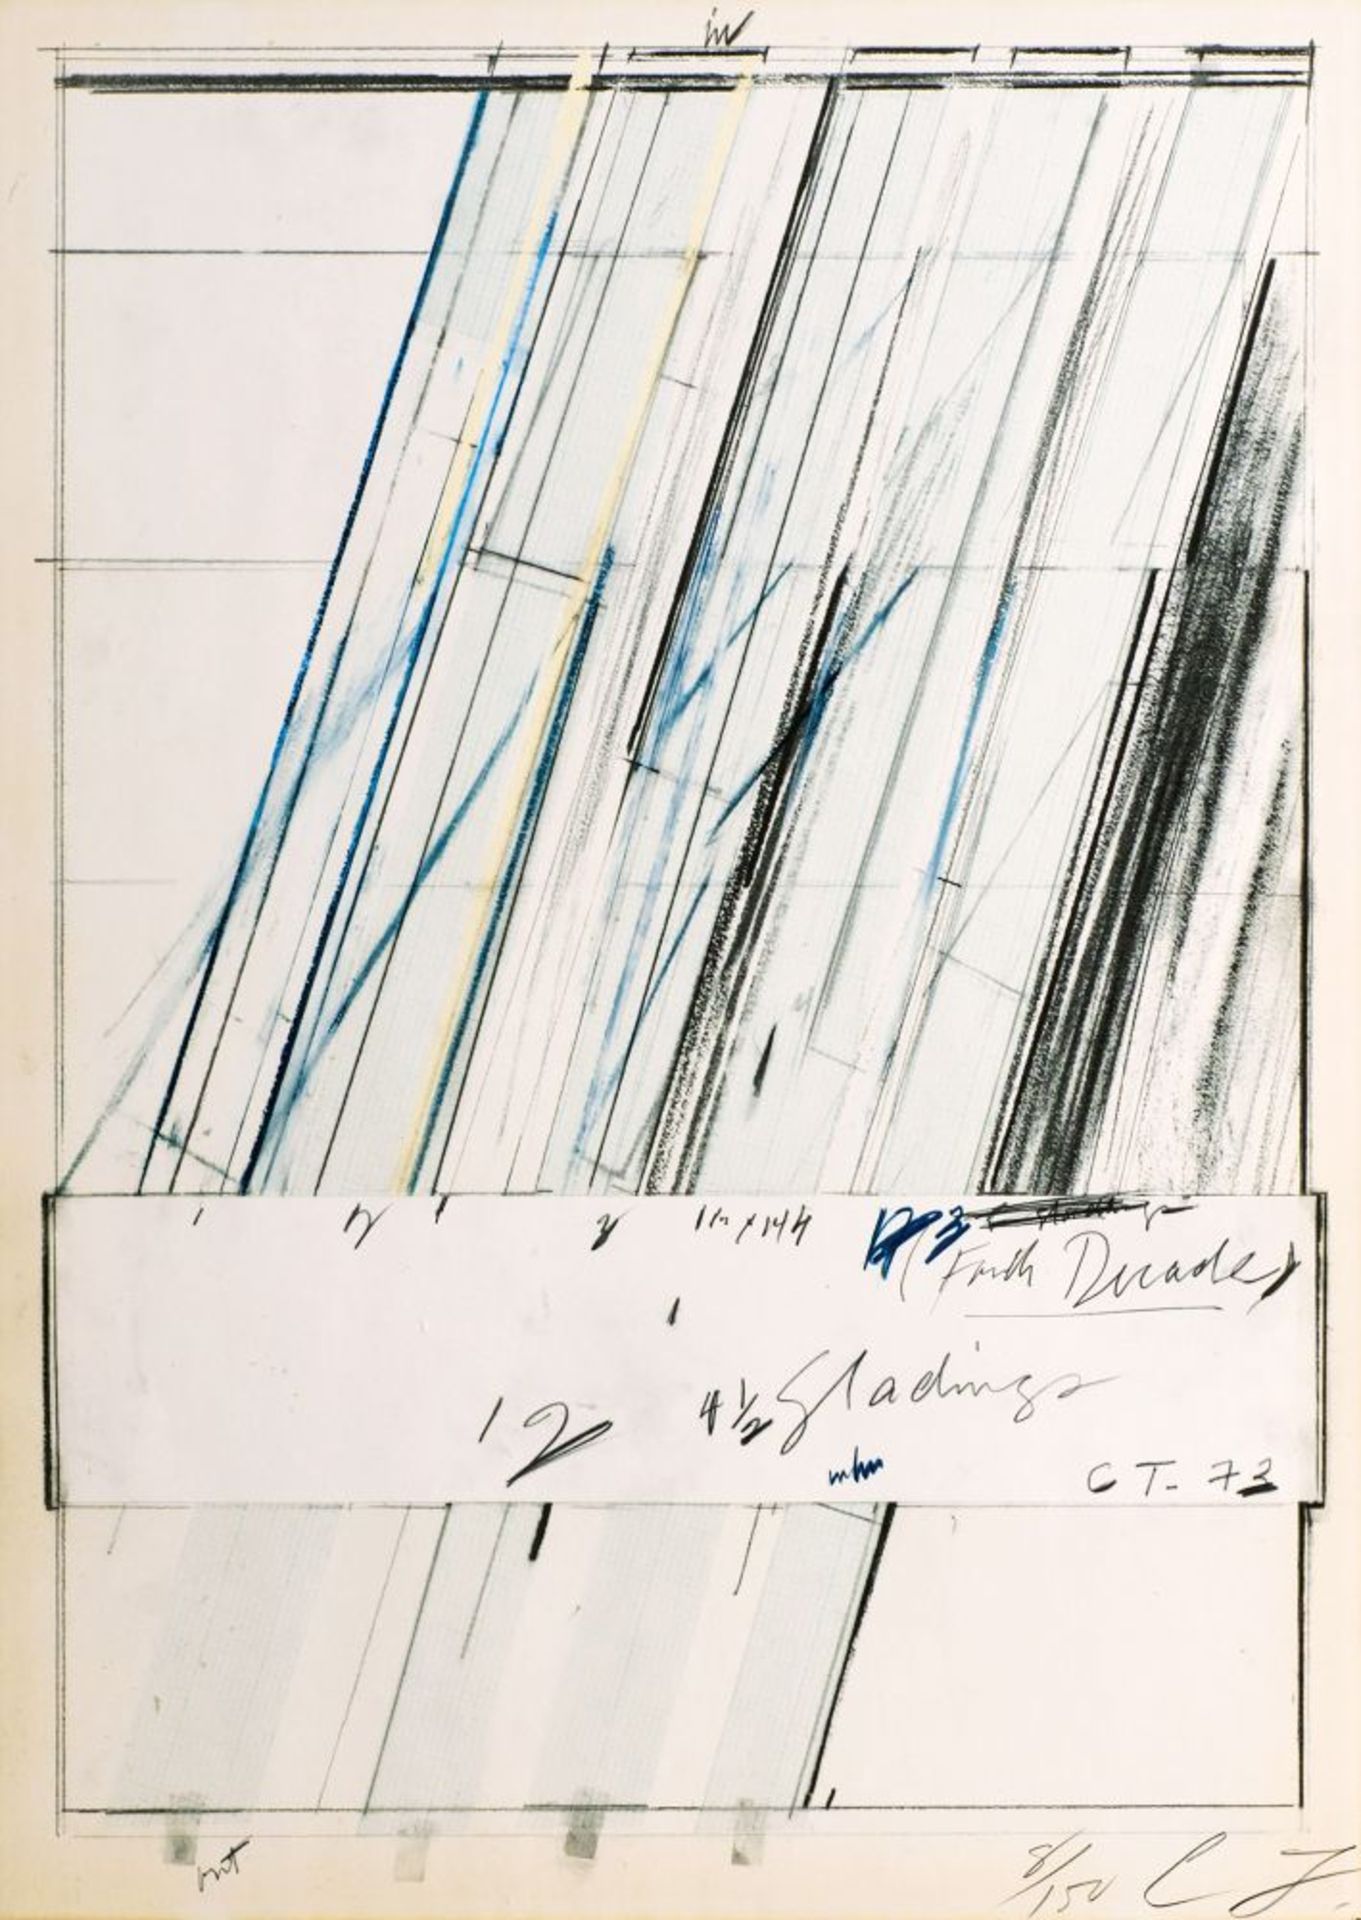 Cy Twombly (Lexington 1928 - Rom 2011). Hommage à Picasso.